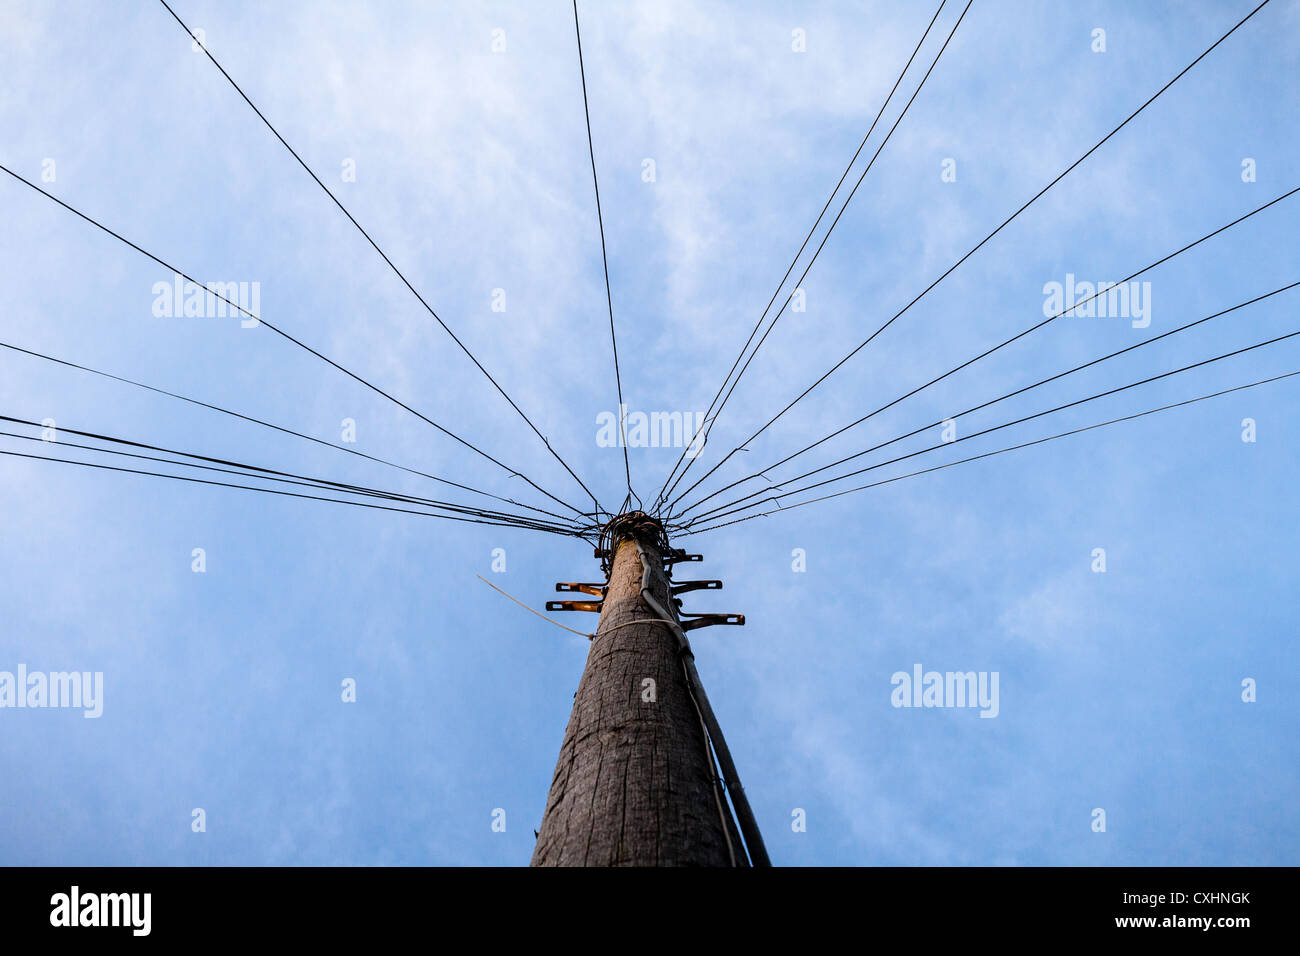 Low angle view of a wooden telegraph pole against a bright blue sky with cloud in Belfast Stock Photo